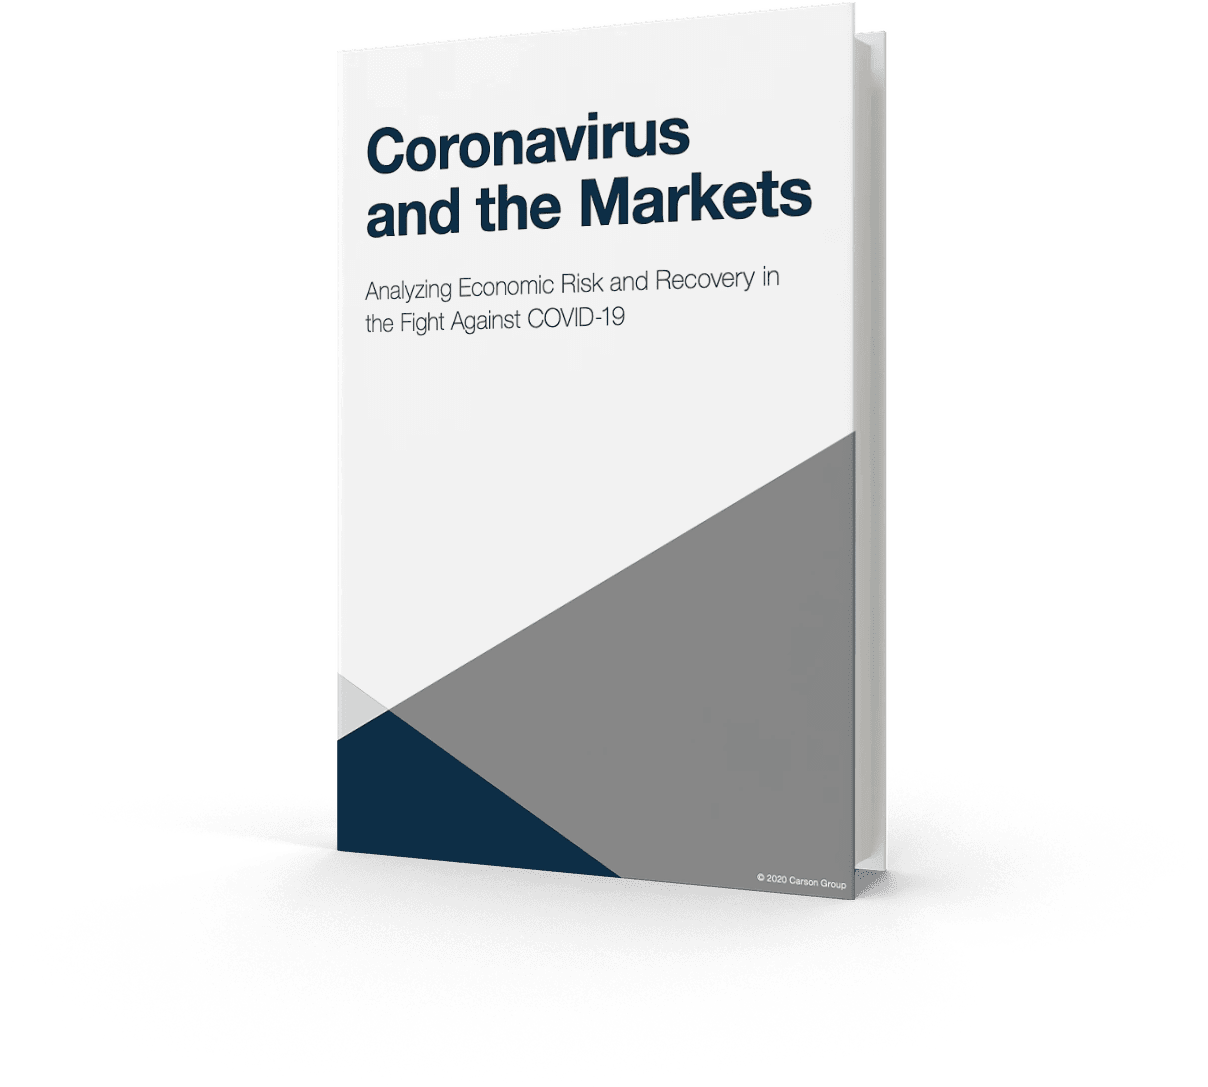 Coronavirus and the Markets: Analyzing Economic Risk and Recovery in the Fight Against COVID-19